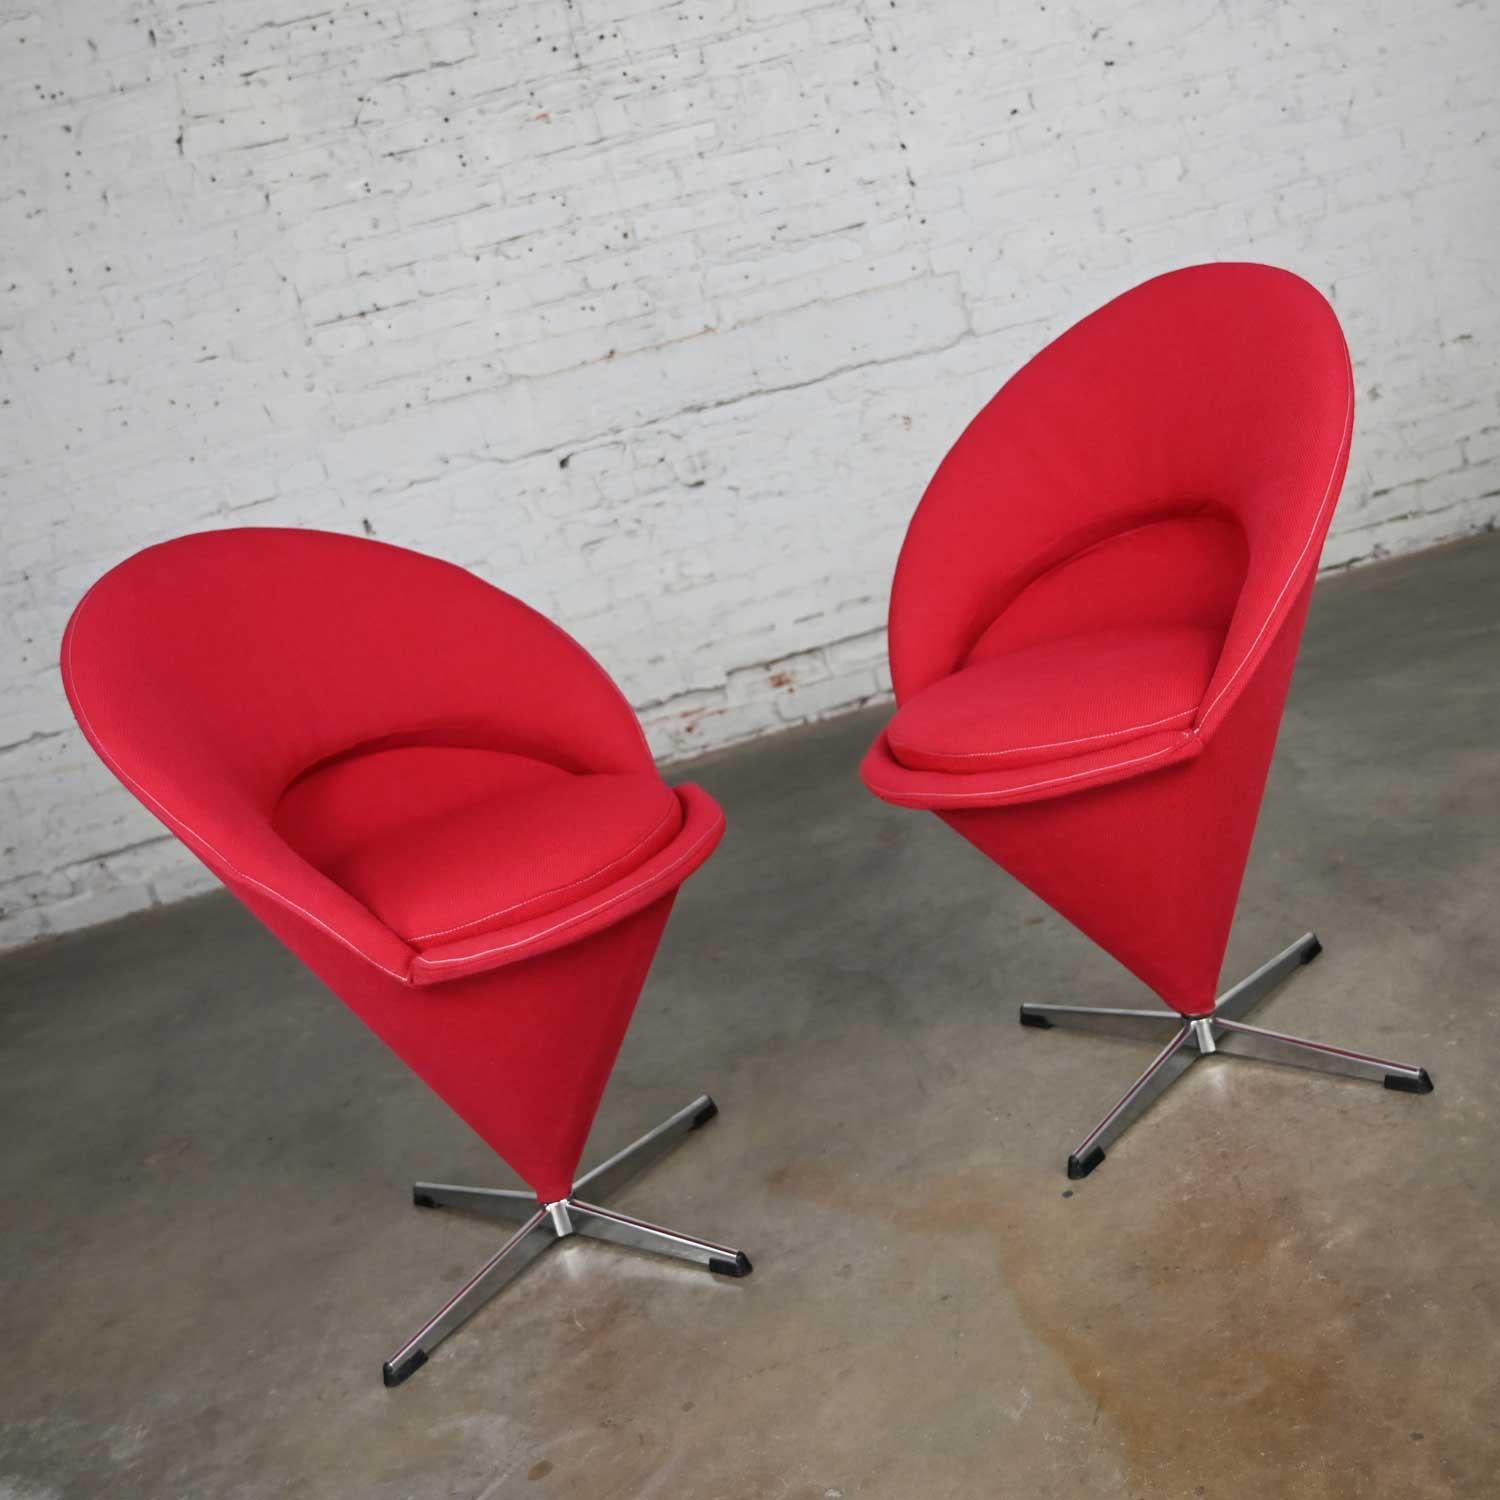 Pair Vintage Mid-Century Modern Red Cone Chairs Verner Panton for Fritz Hansen For Sale 7